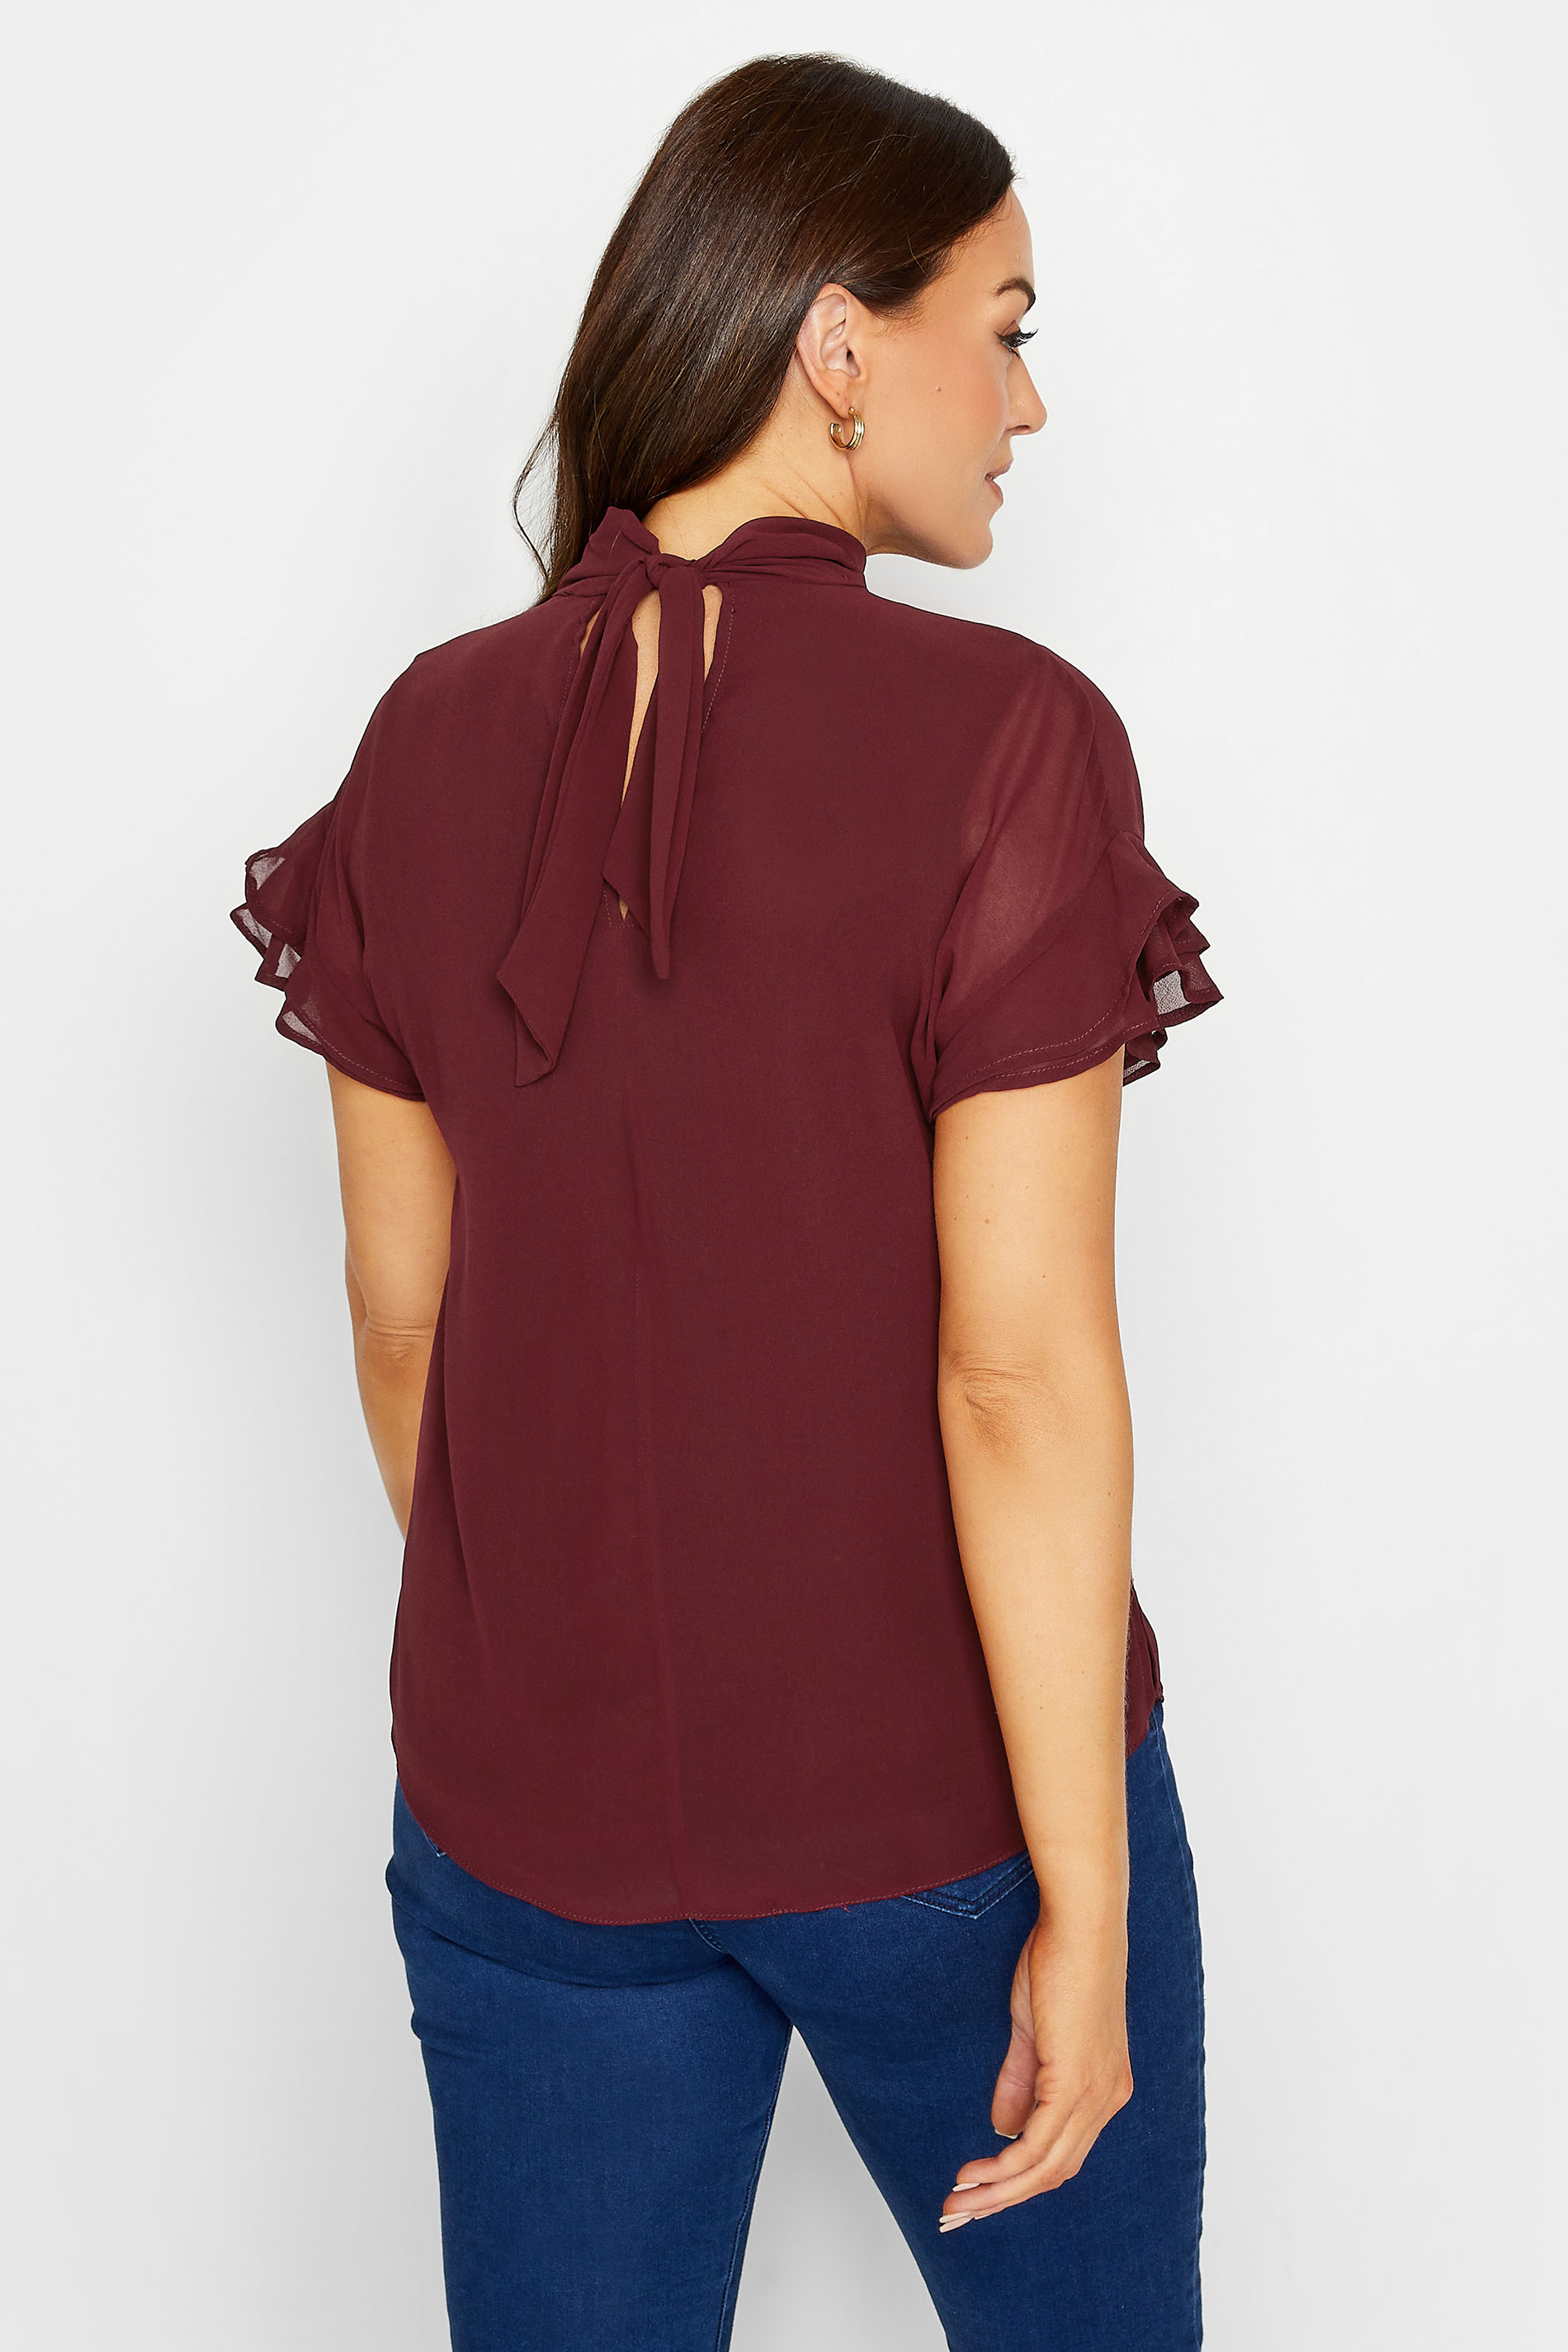 Burgundy Sequin Top  Valencia High Neck Top – Style Cheat